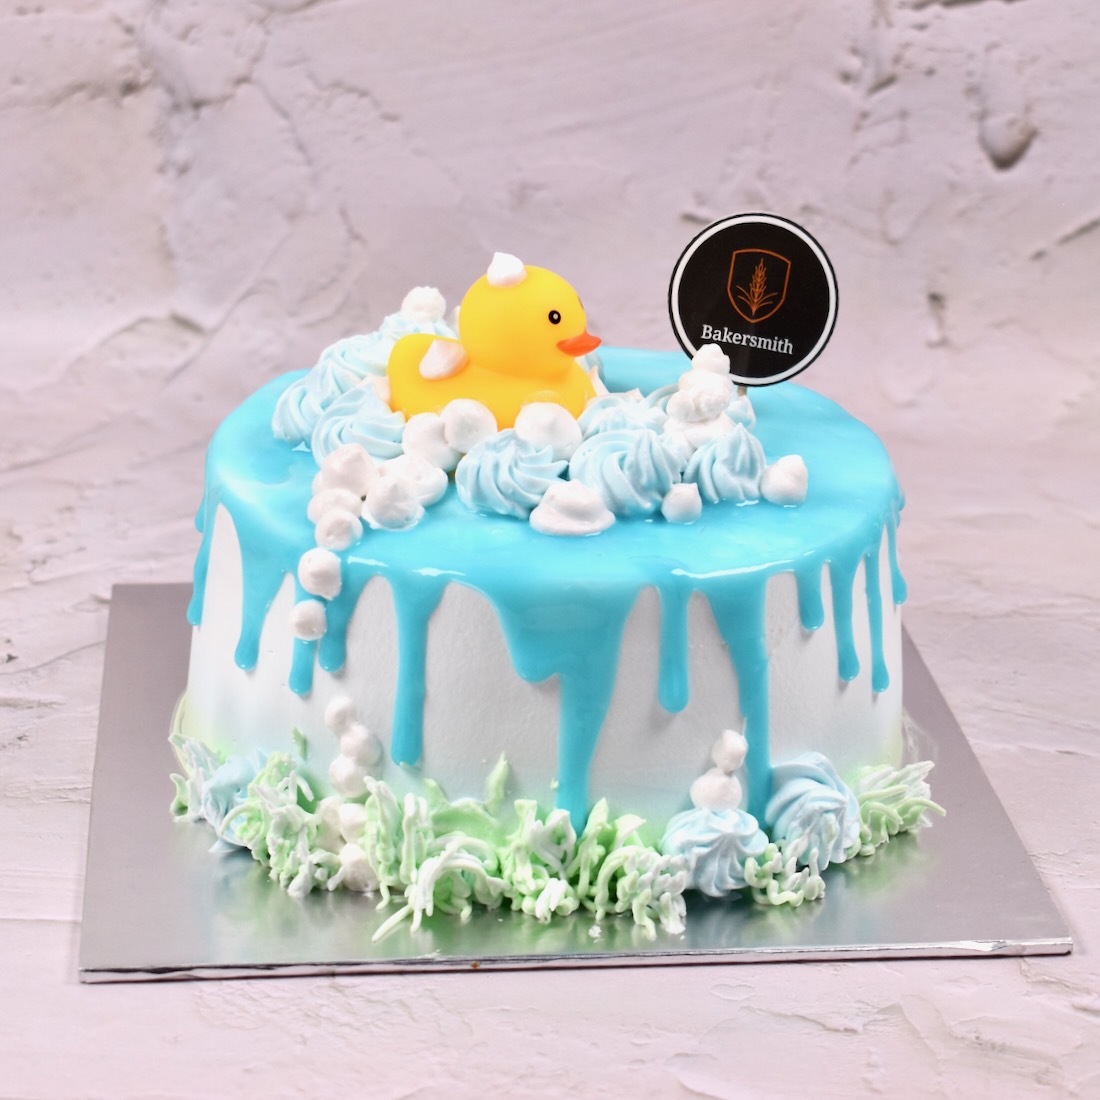 Rubber Duckling Cake - Bakersmith